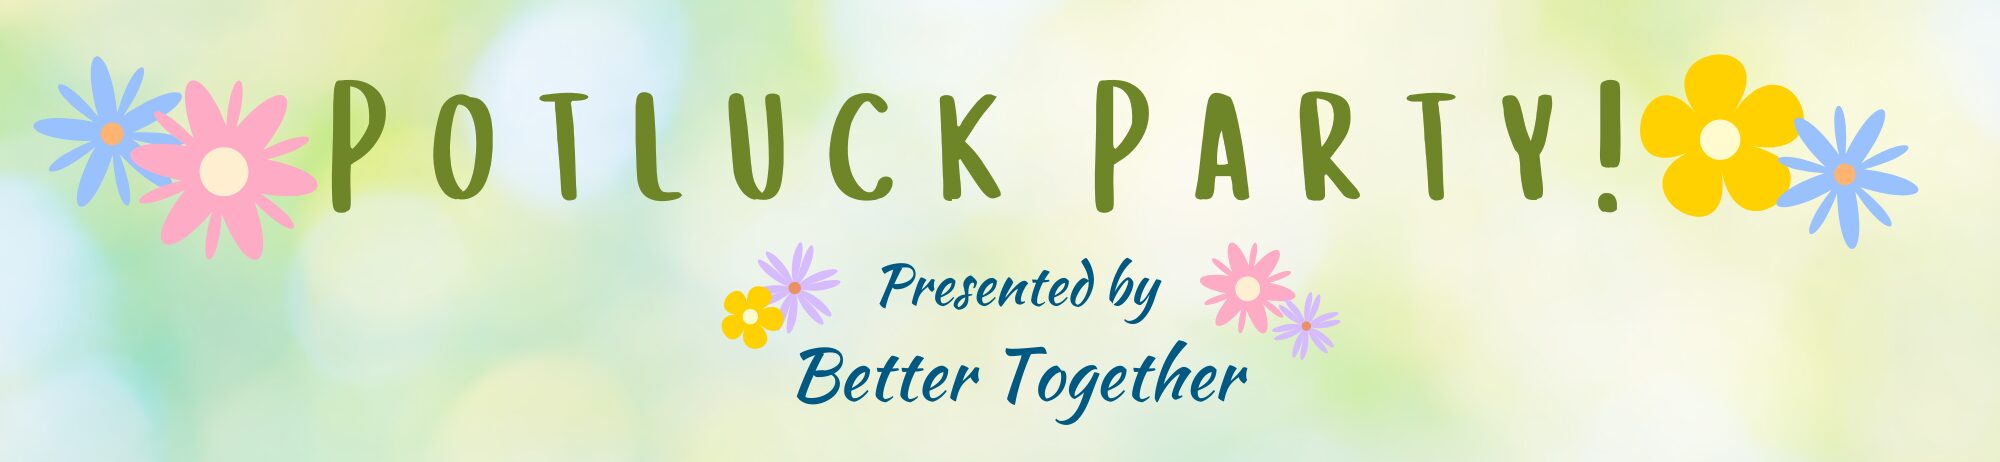 Potluck Party banner with Spring time theme